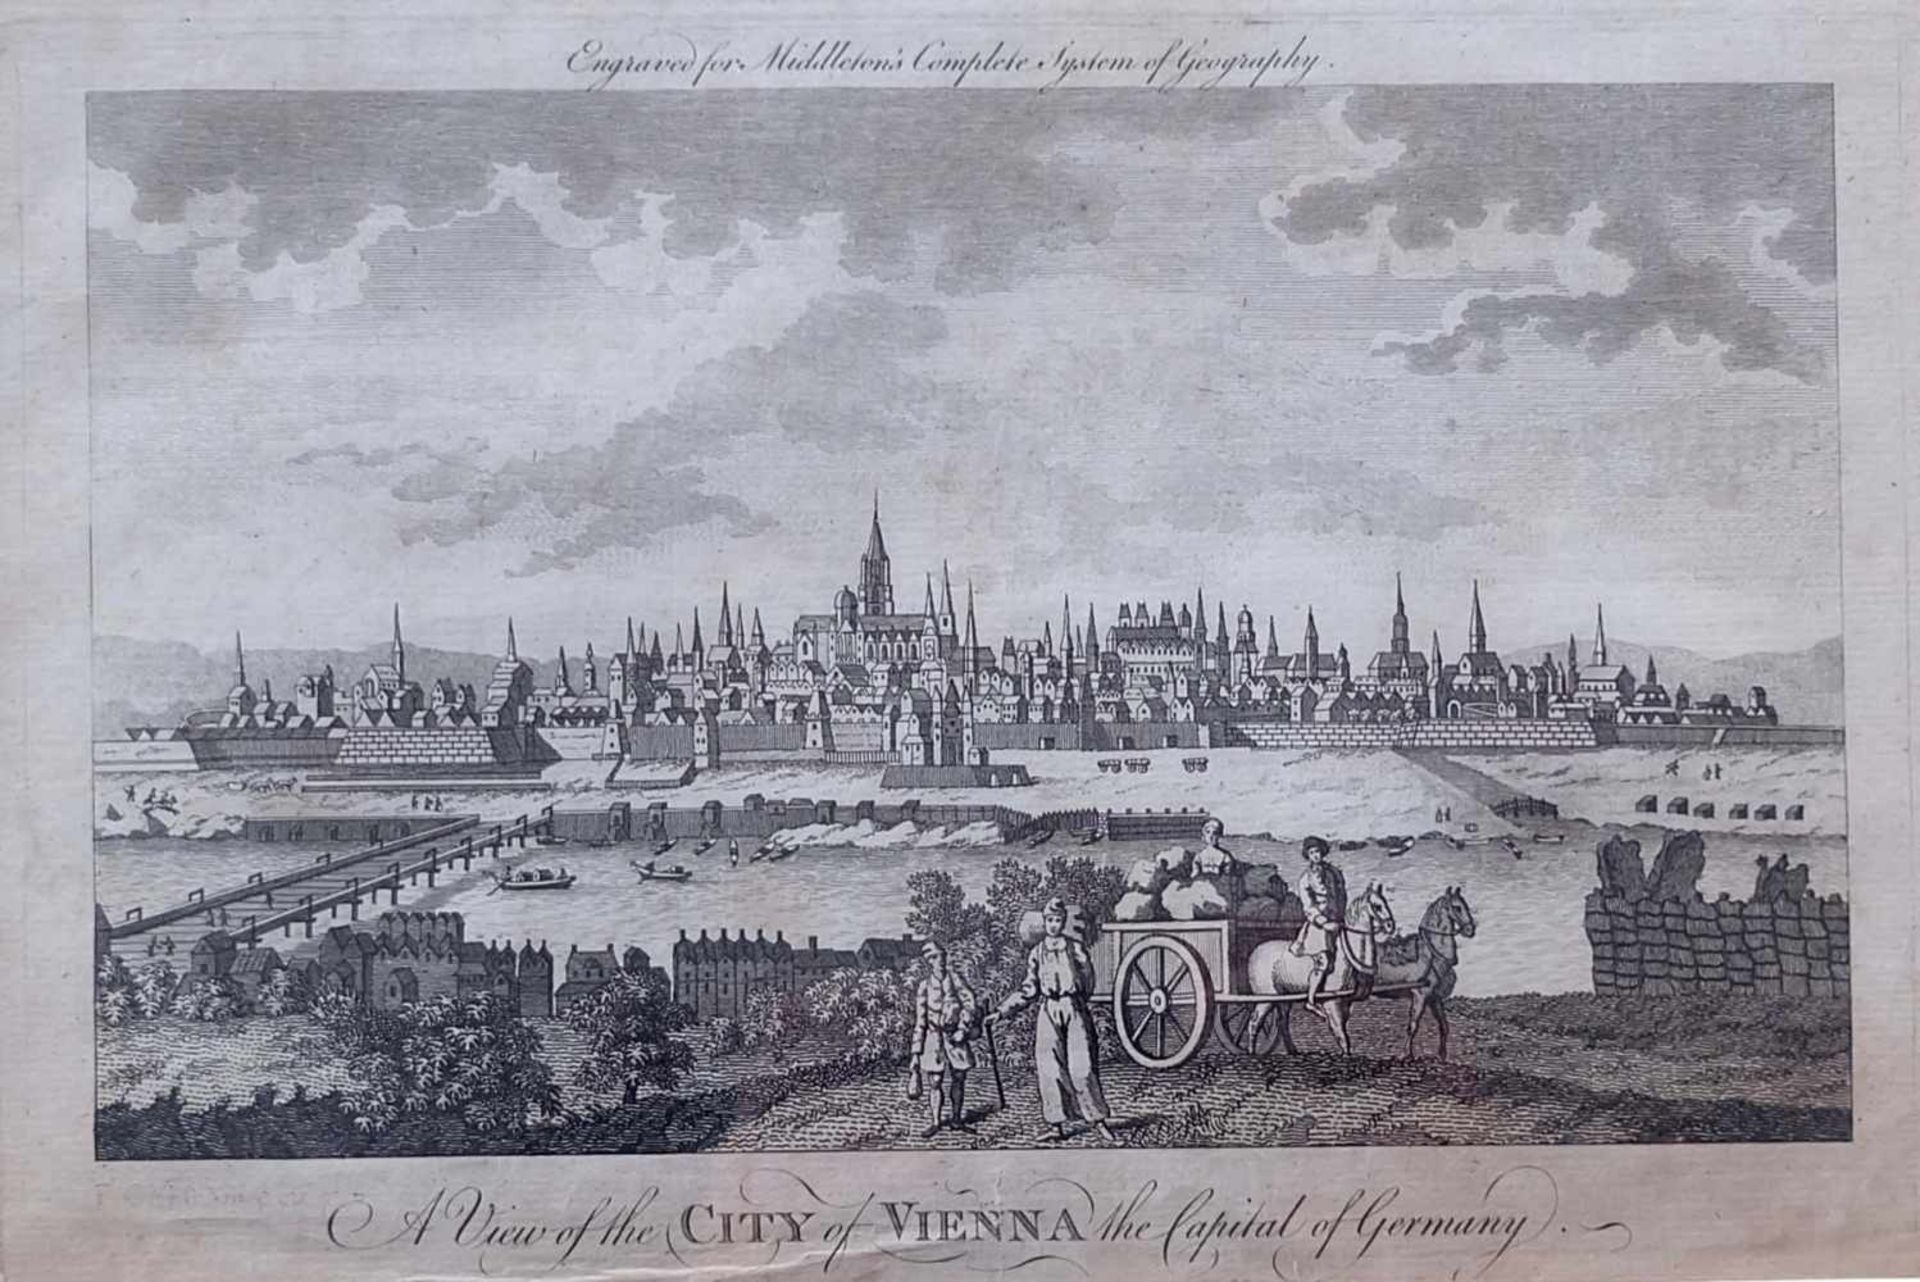 KUPFERSTICHVEDUTE, "A View of the city of Vienna the Capital of Germany", Illustration zu Middletons